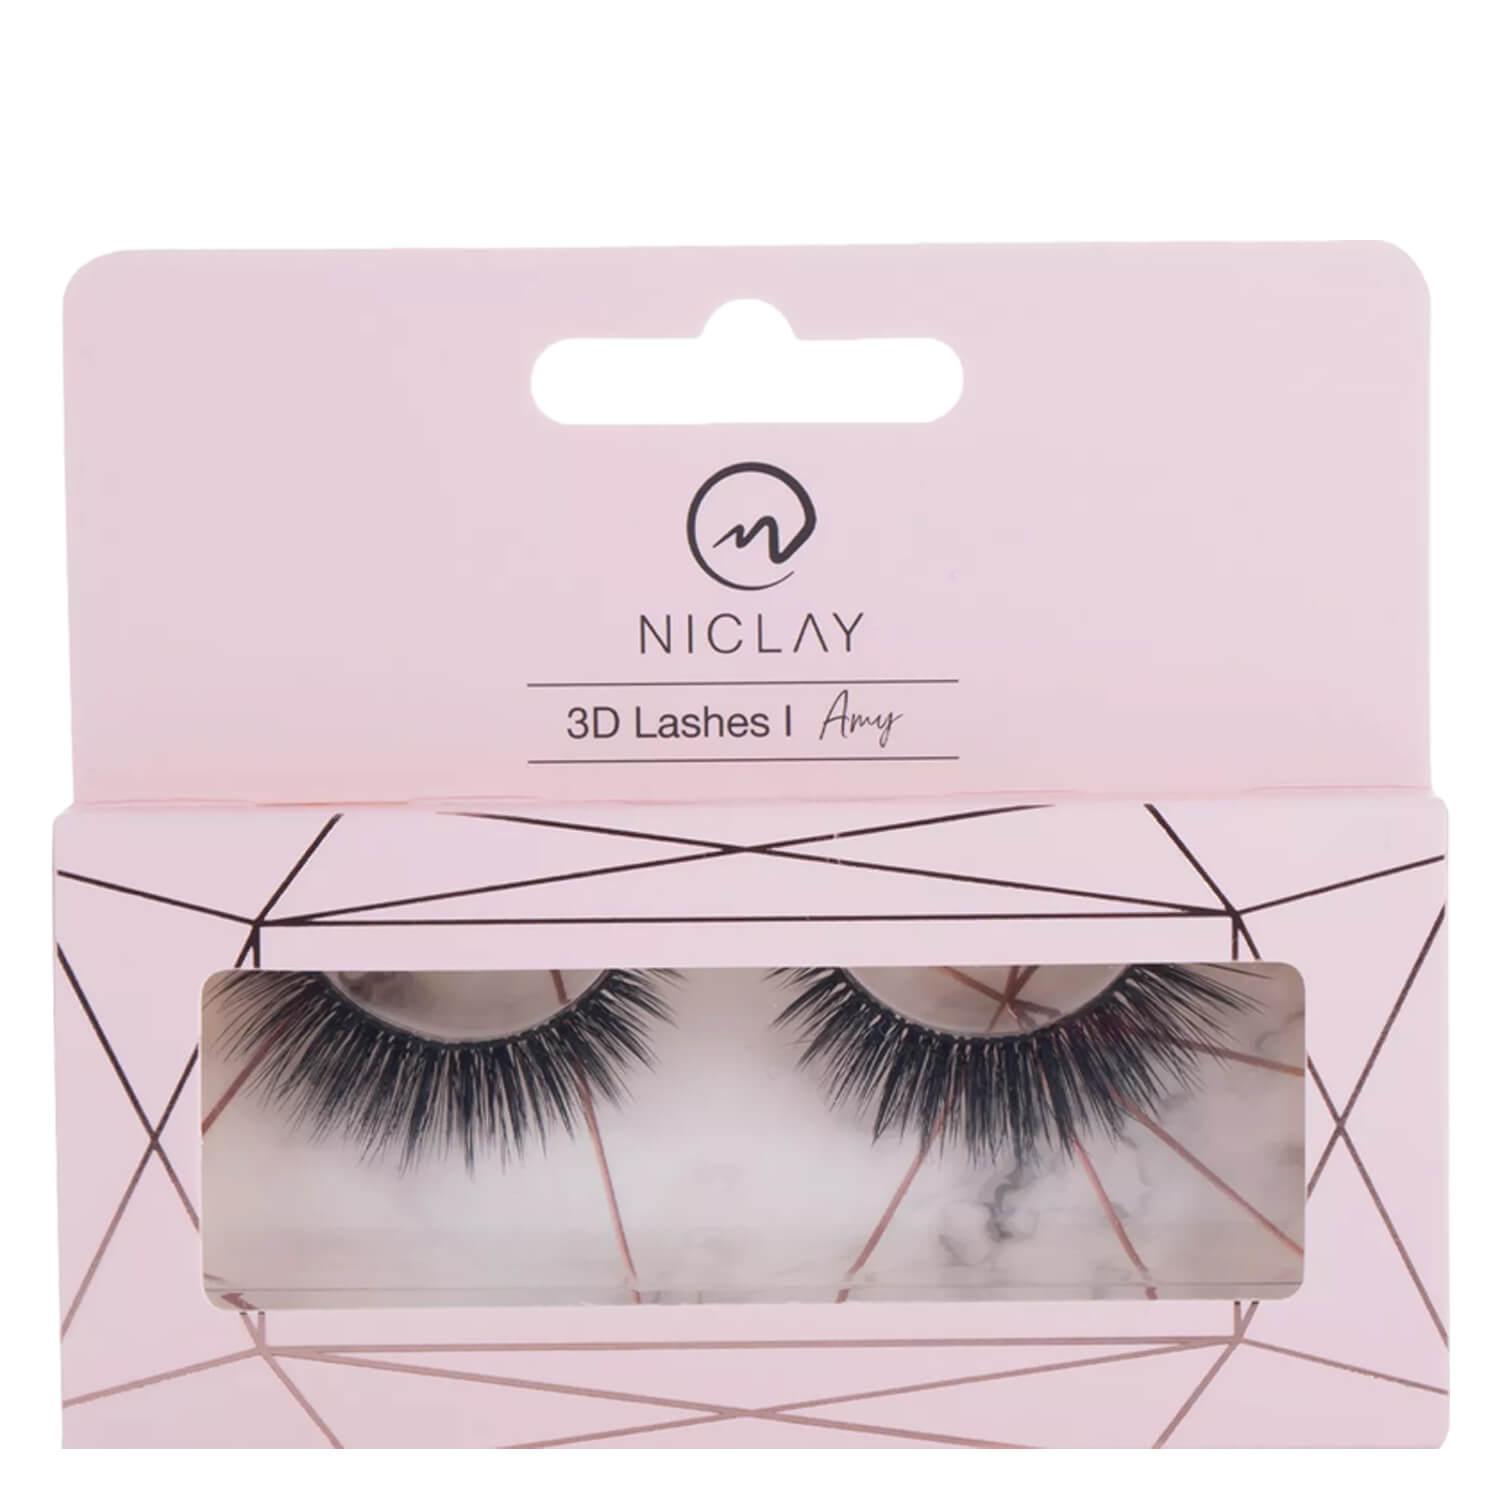 NICLAY - 3D Lashes Amy